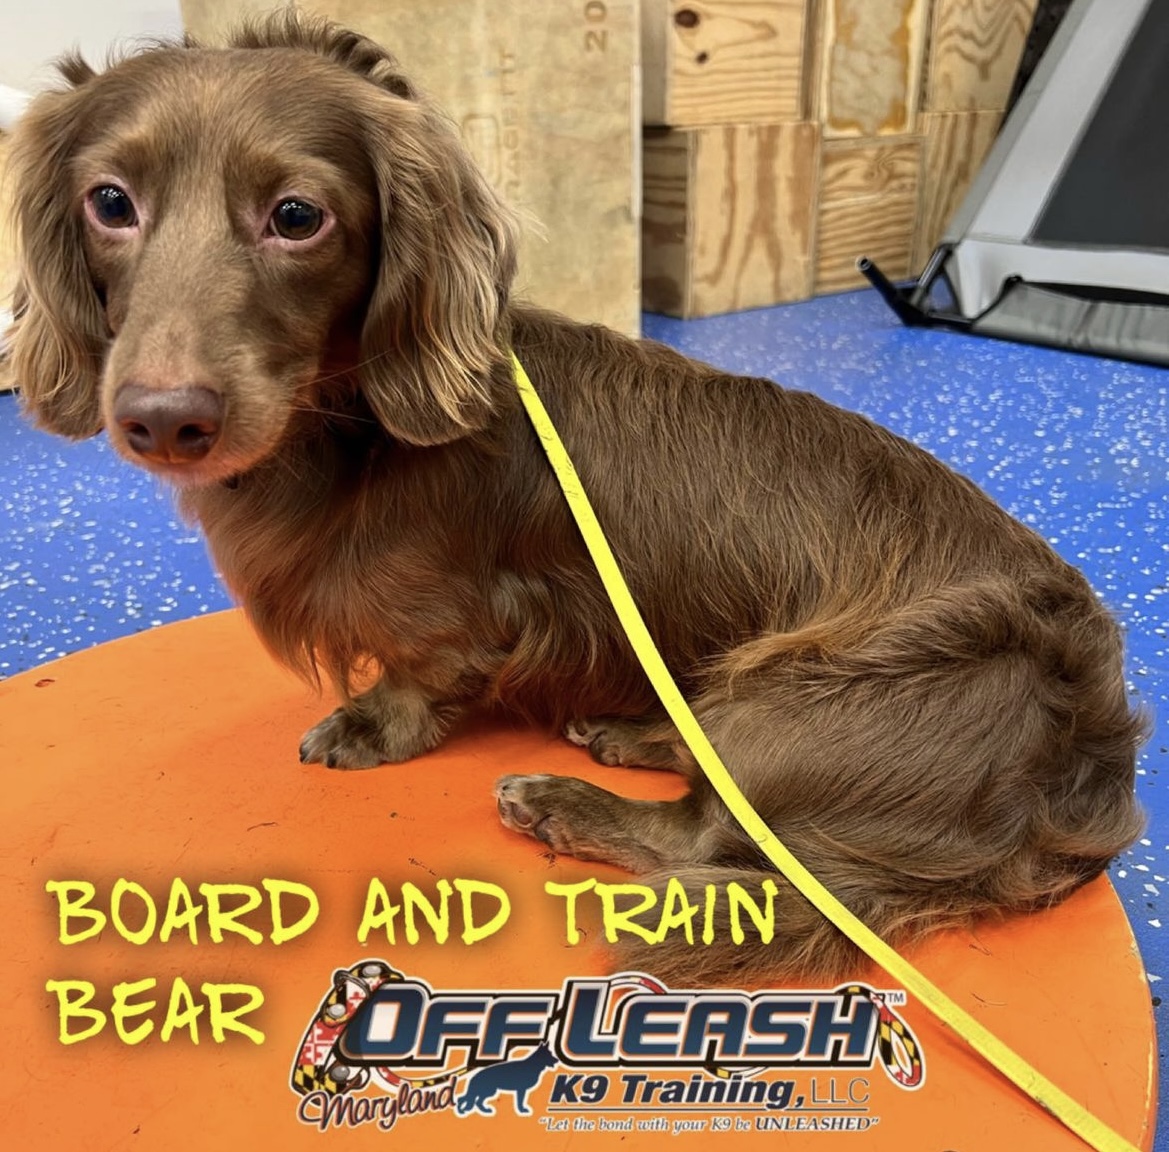 Dog named Bear who participated in the board and train dog training